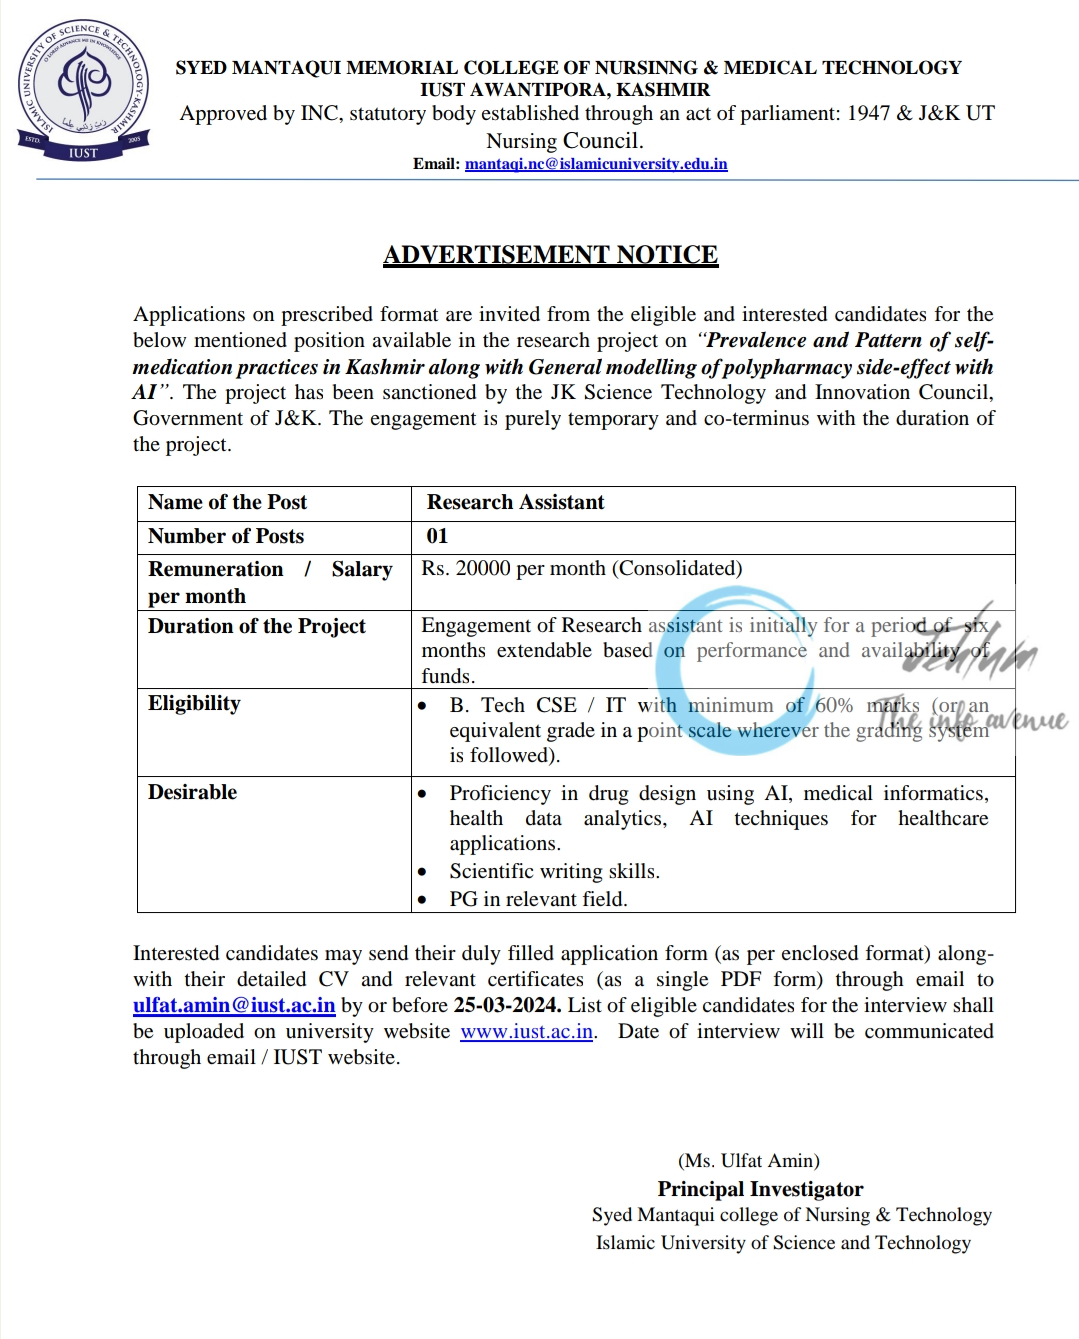 IUST AWANTIPORA SYED MANTAQUI MEMORIAL COLLEGE OF NURSING AND MEDICAL TECHNOLOGY ADVERTISEMENT NOTICE 2024